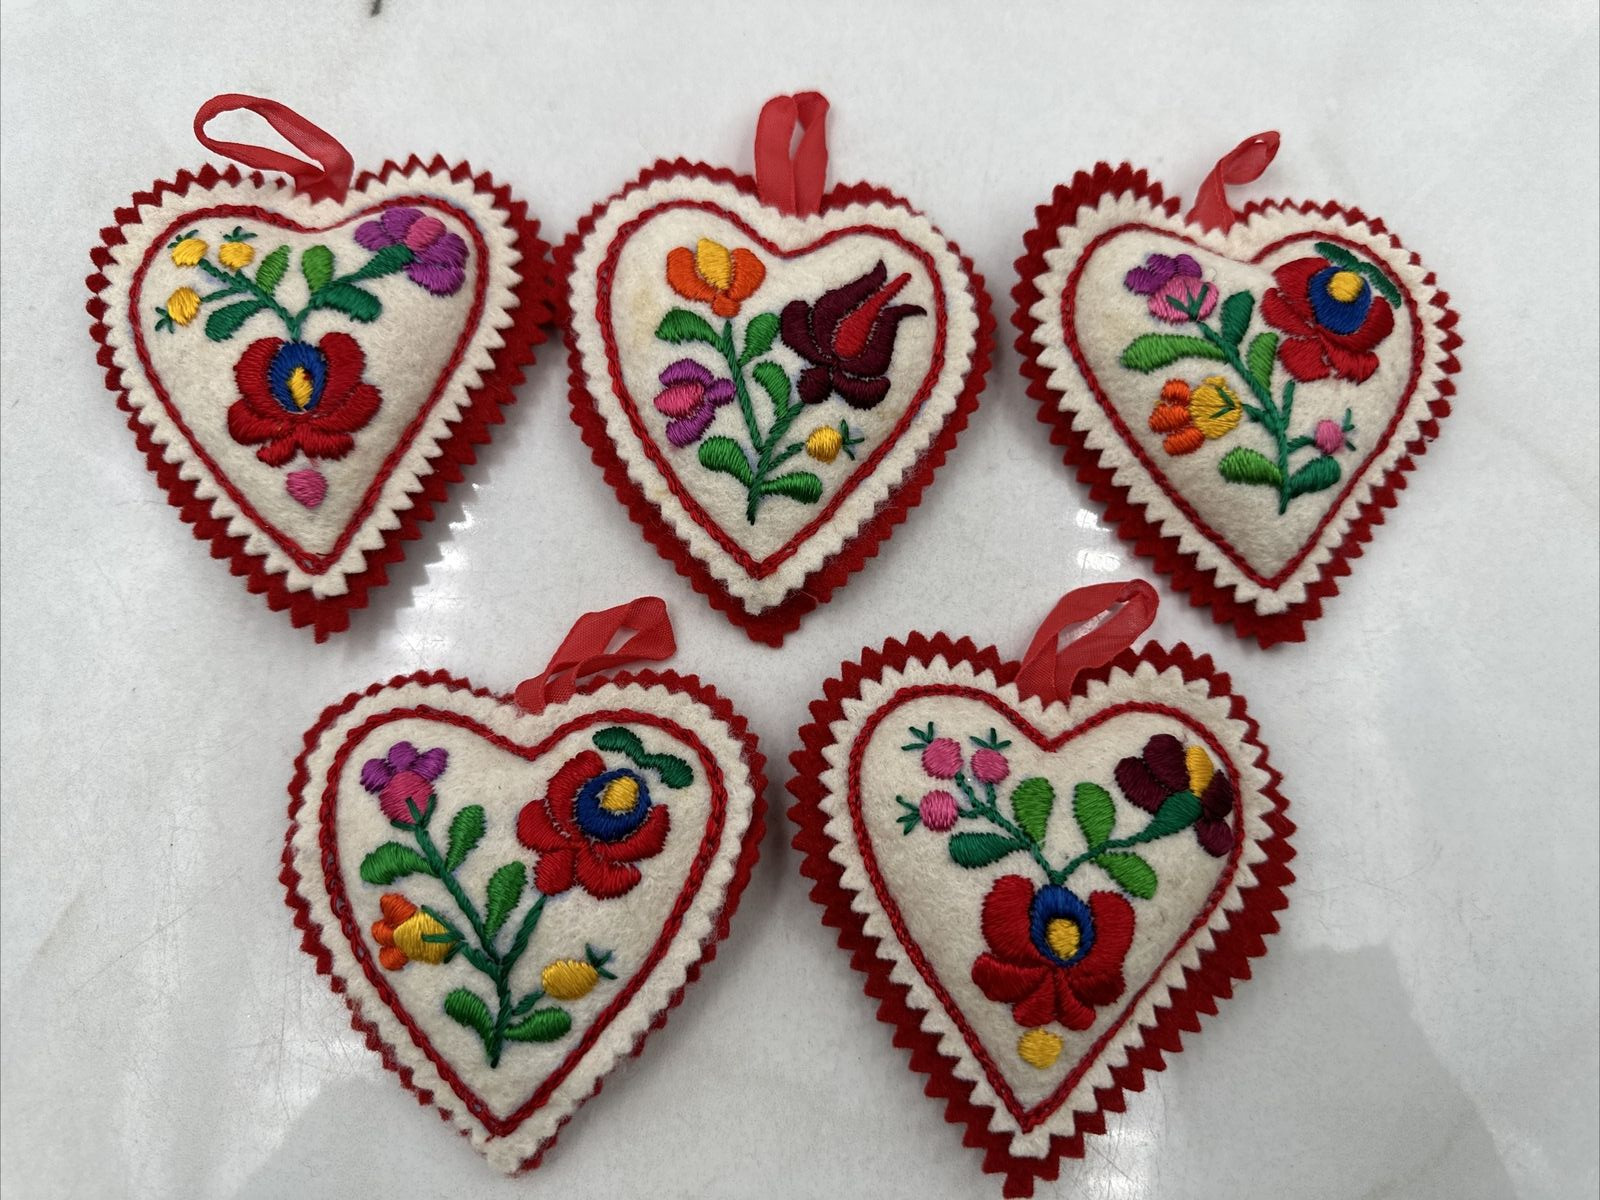 VTG HUNGARIAN WOOL EMBROIDERED Red Heart ORNAMENT Christmas Handmade Hungary-5